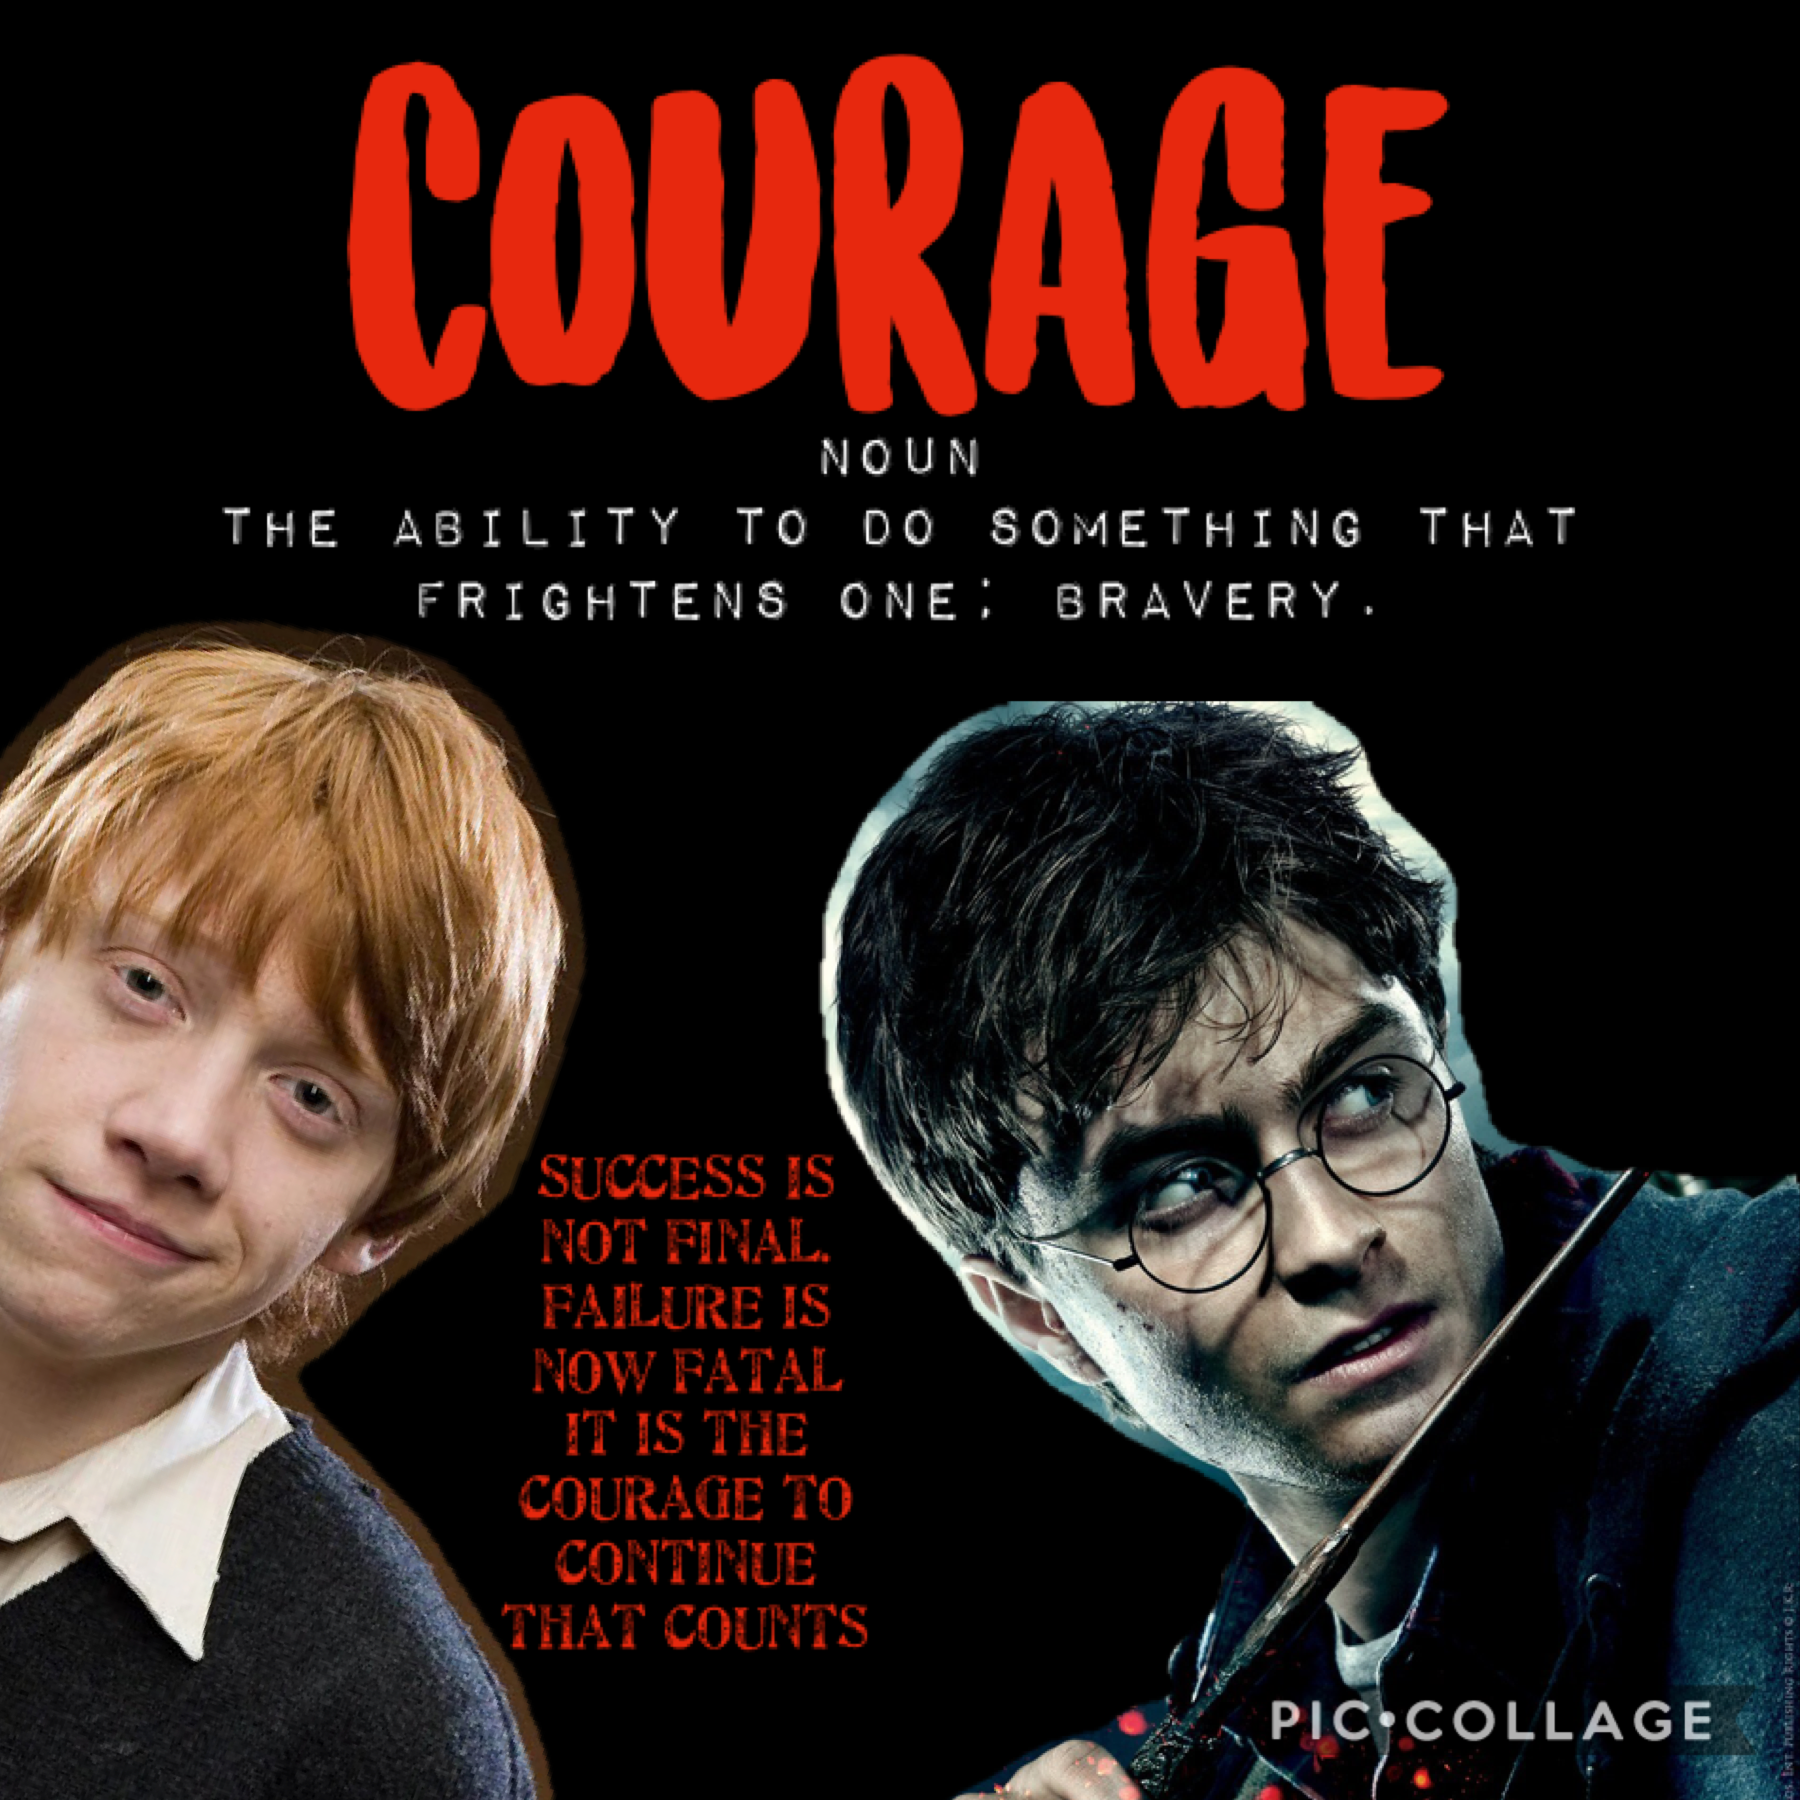 #courage 